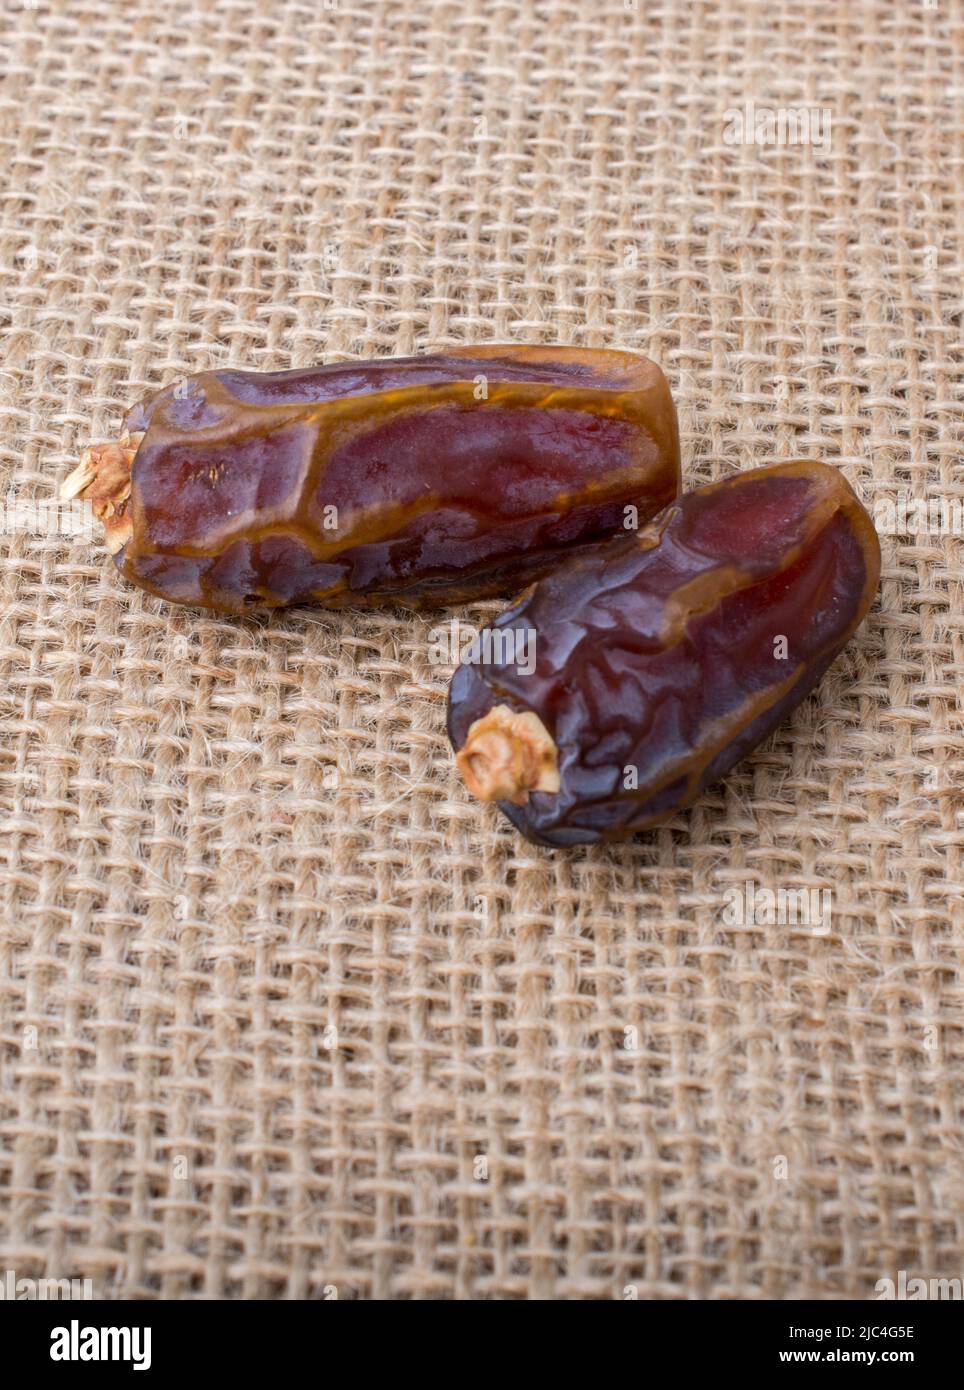 Date fruit placed on a linen canvas background Stock Photo